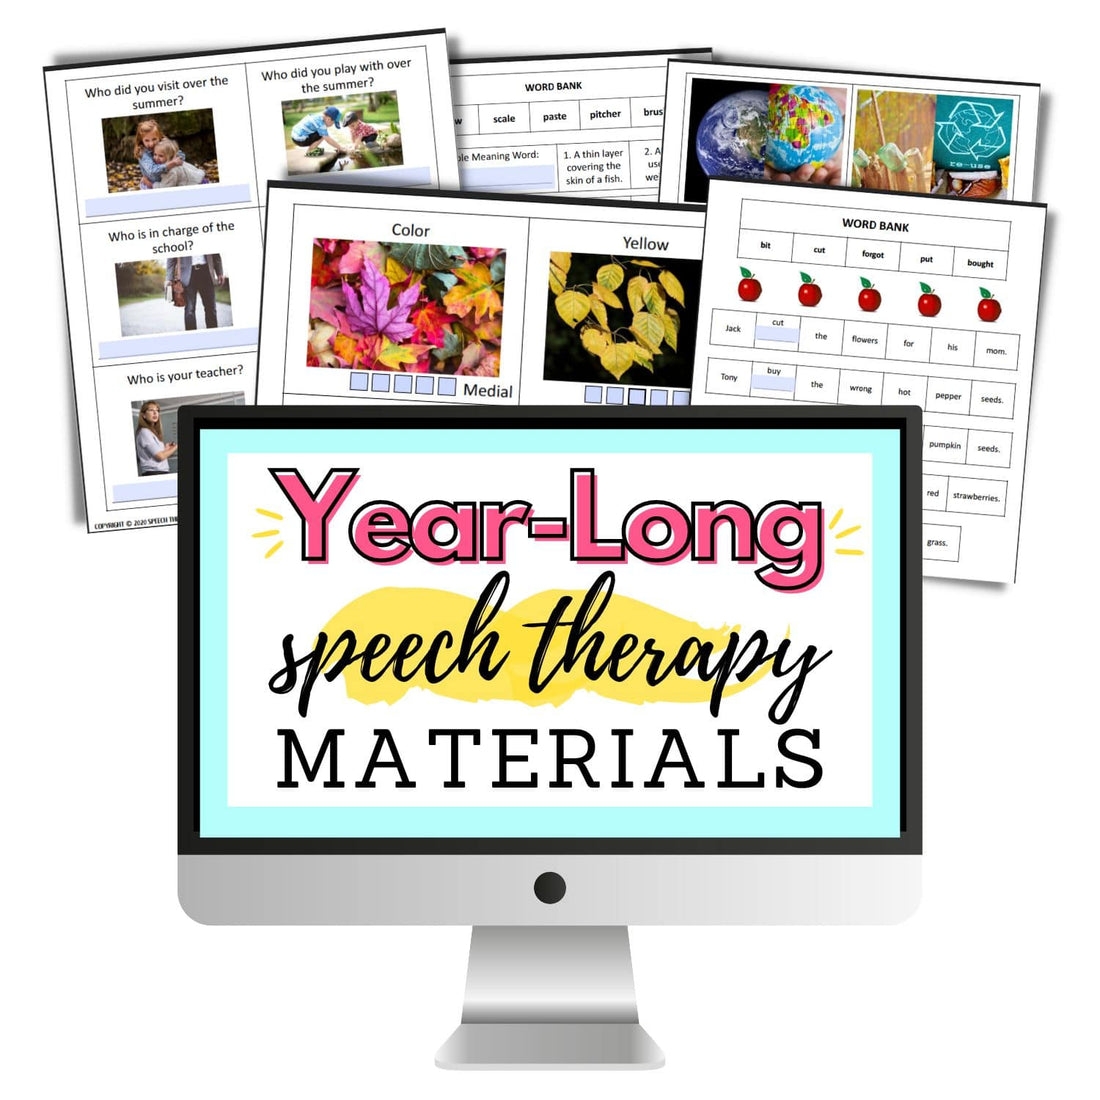 Year-Long Speech Therapy Materials